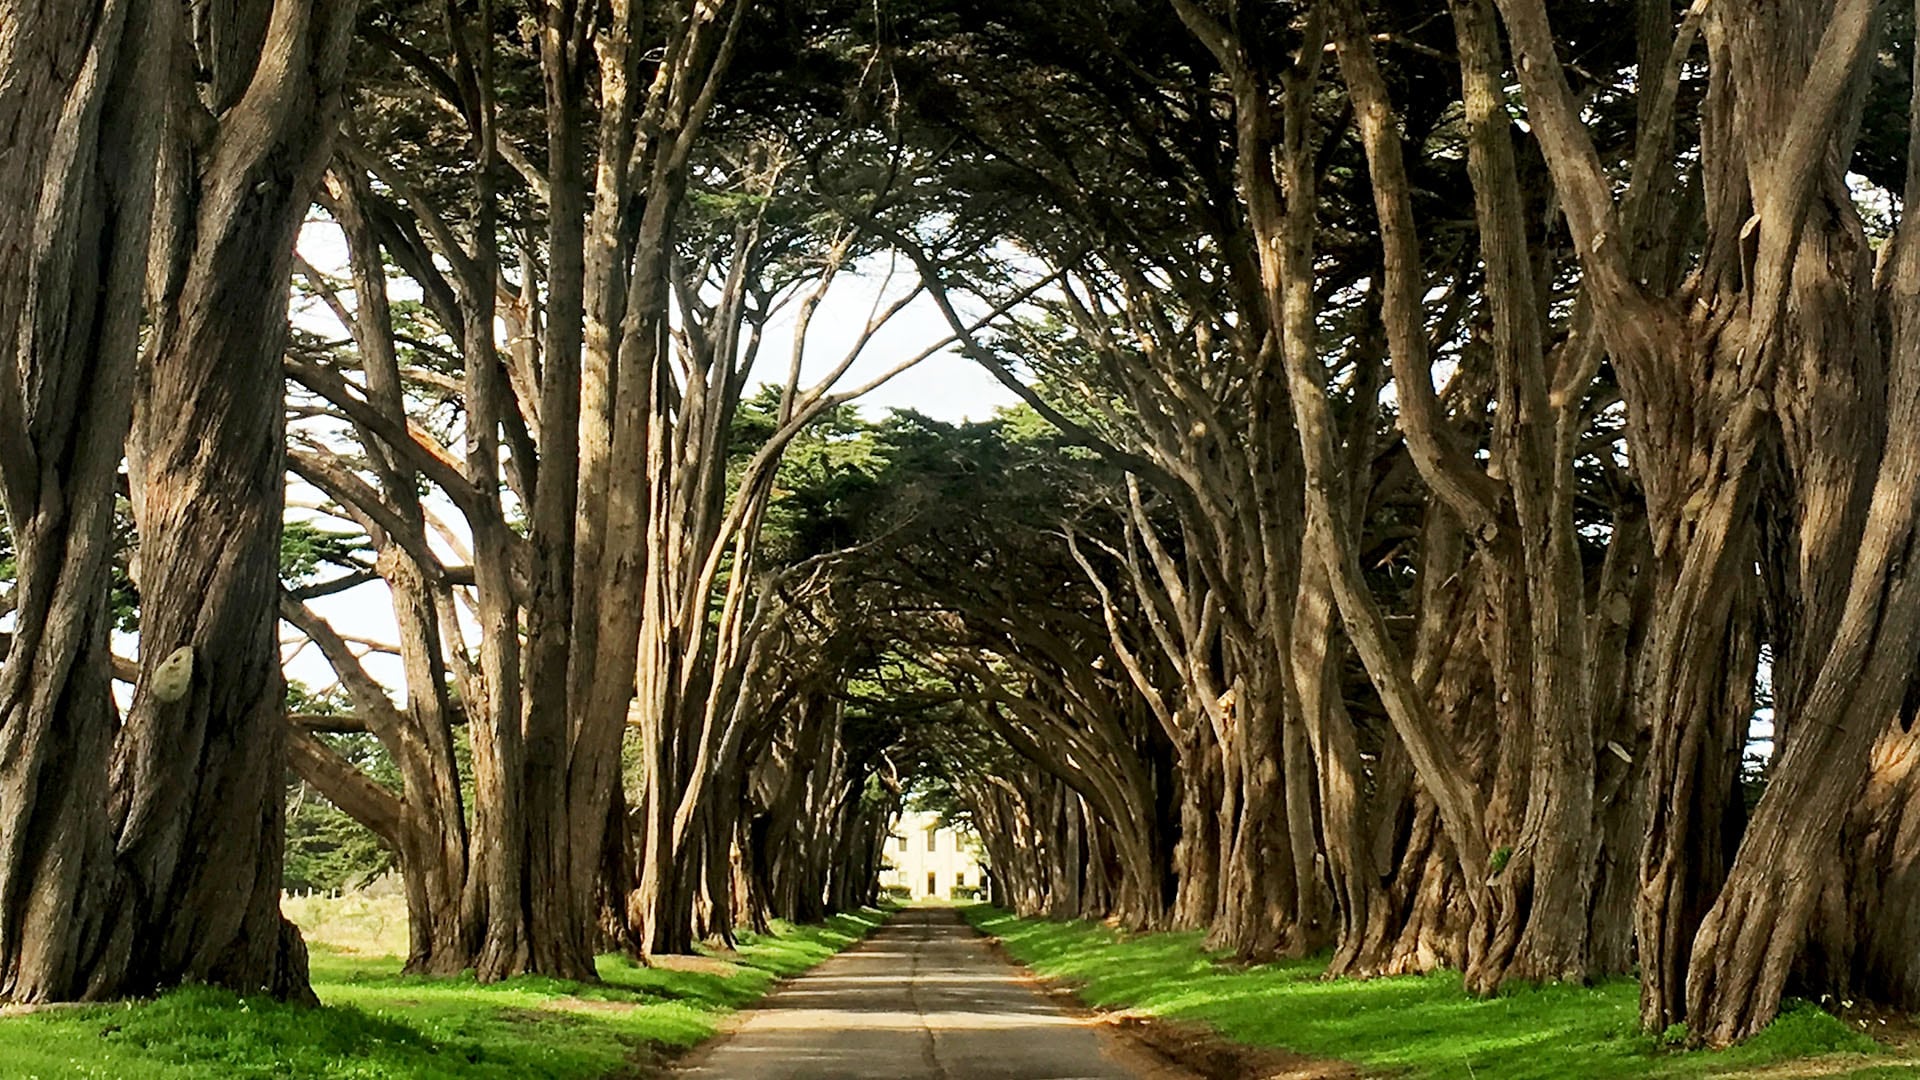 The Cypress Tree Tunnel at Point Reyes, California, is worth a stop, especially for photographers.